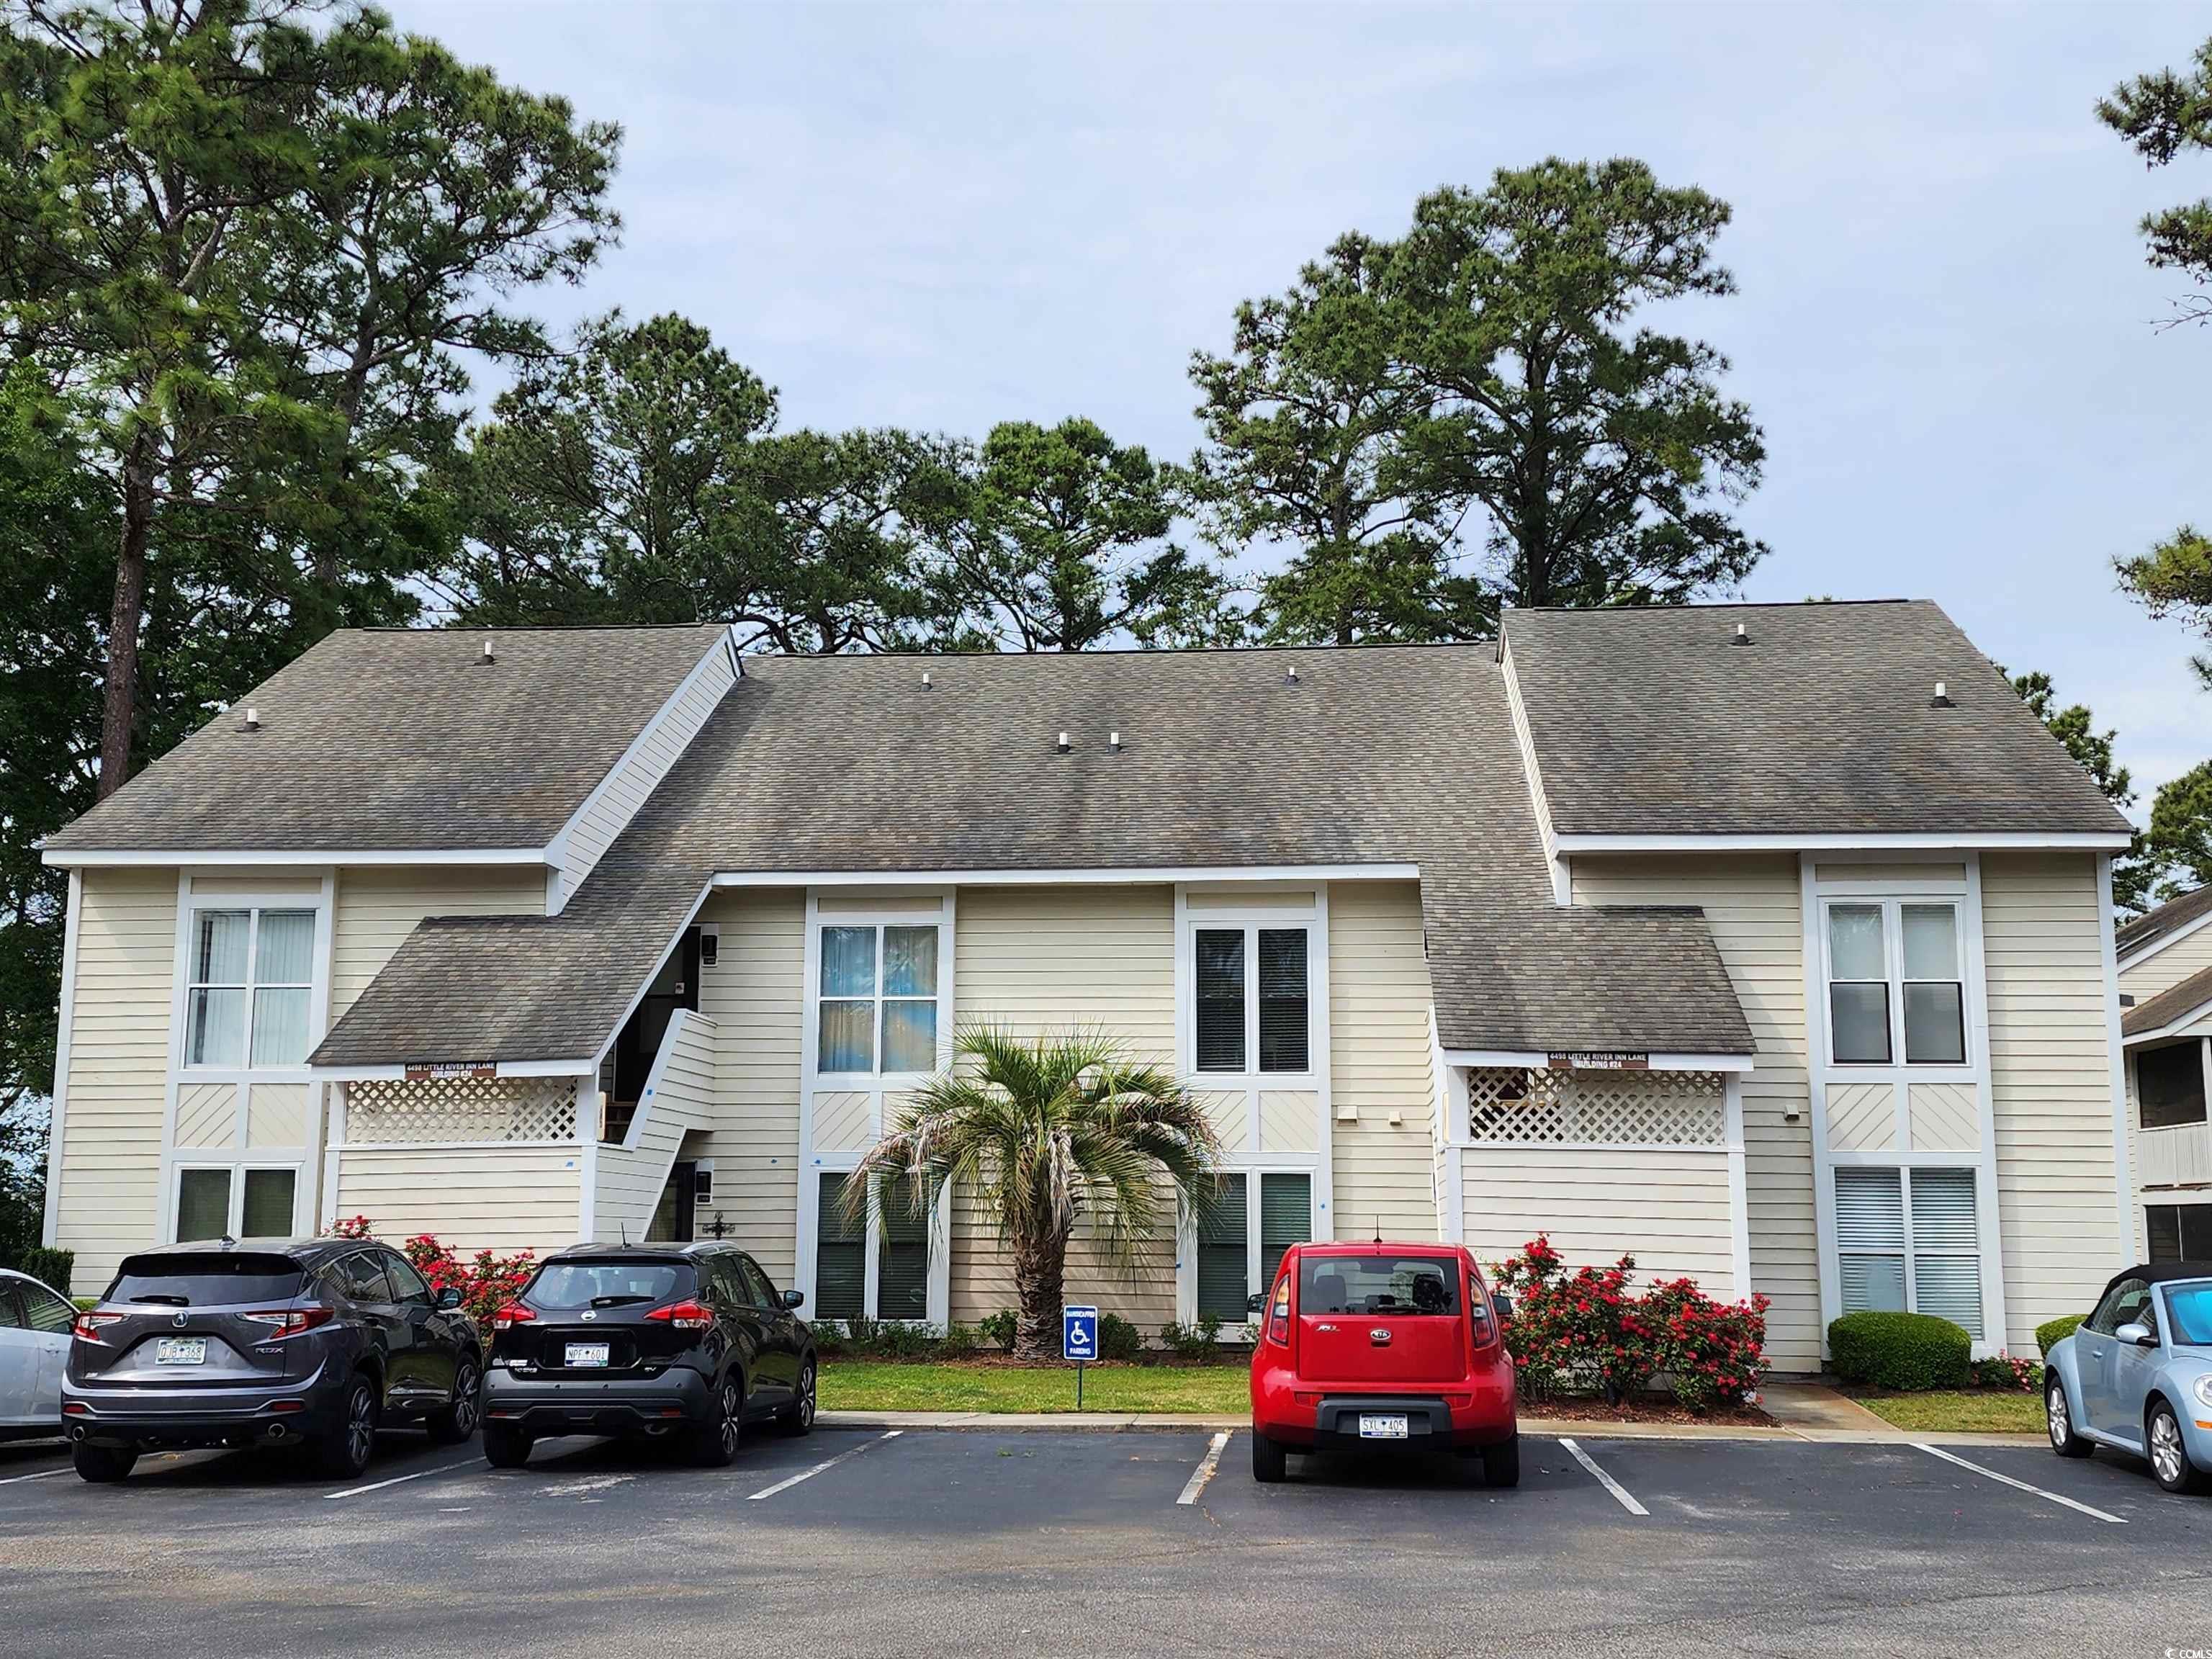 welcome to the quaint community of little river inn resort conveniently located minutes to shopping, dining, and cherry grove beach. this 2 bedroom 2 bathroom condo will make the perfect primary home, second home, or investment property. walls have been recently painted, appliances updated in 2023, water heater replaced in 2020, hvac replaced in 2021. washer and dryer and all appliances convey. enjoy your morning coffee on the quiet balcony before enjoying a day at the beach.